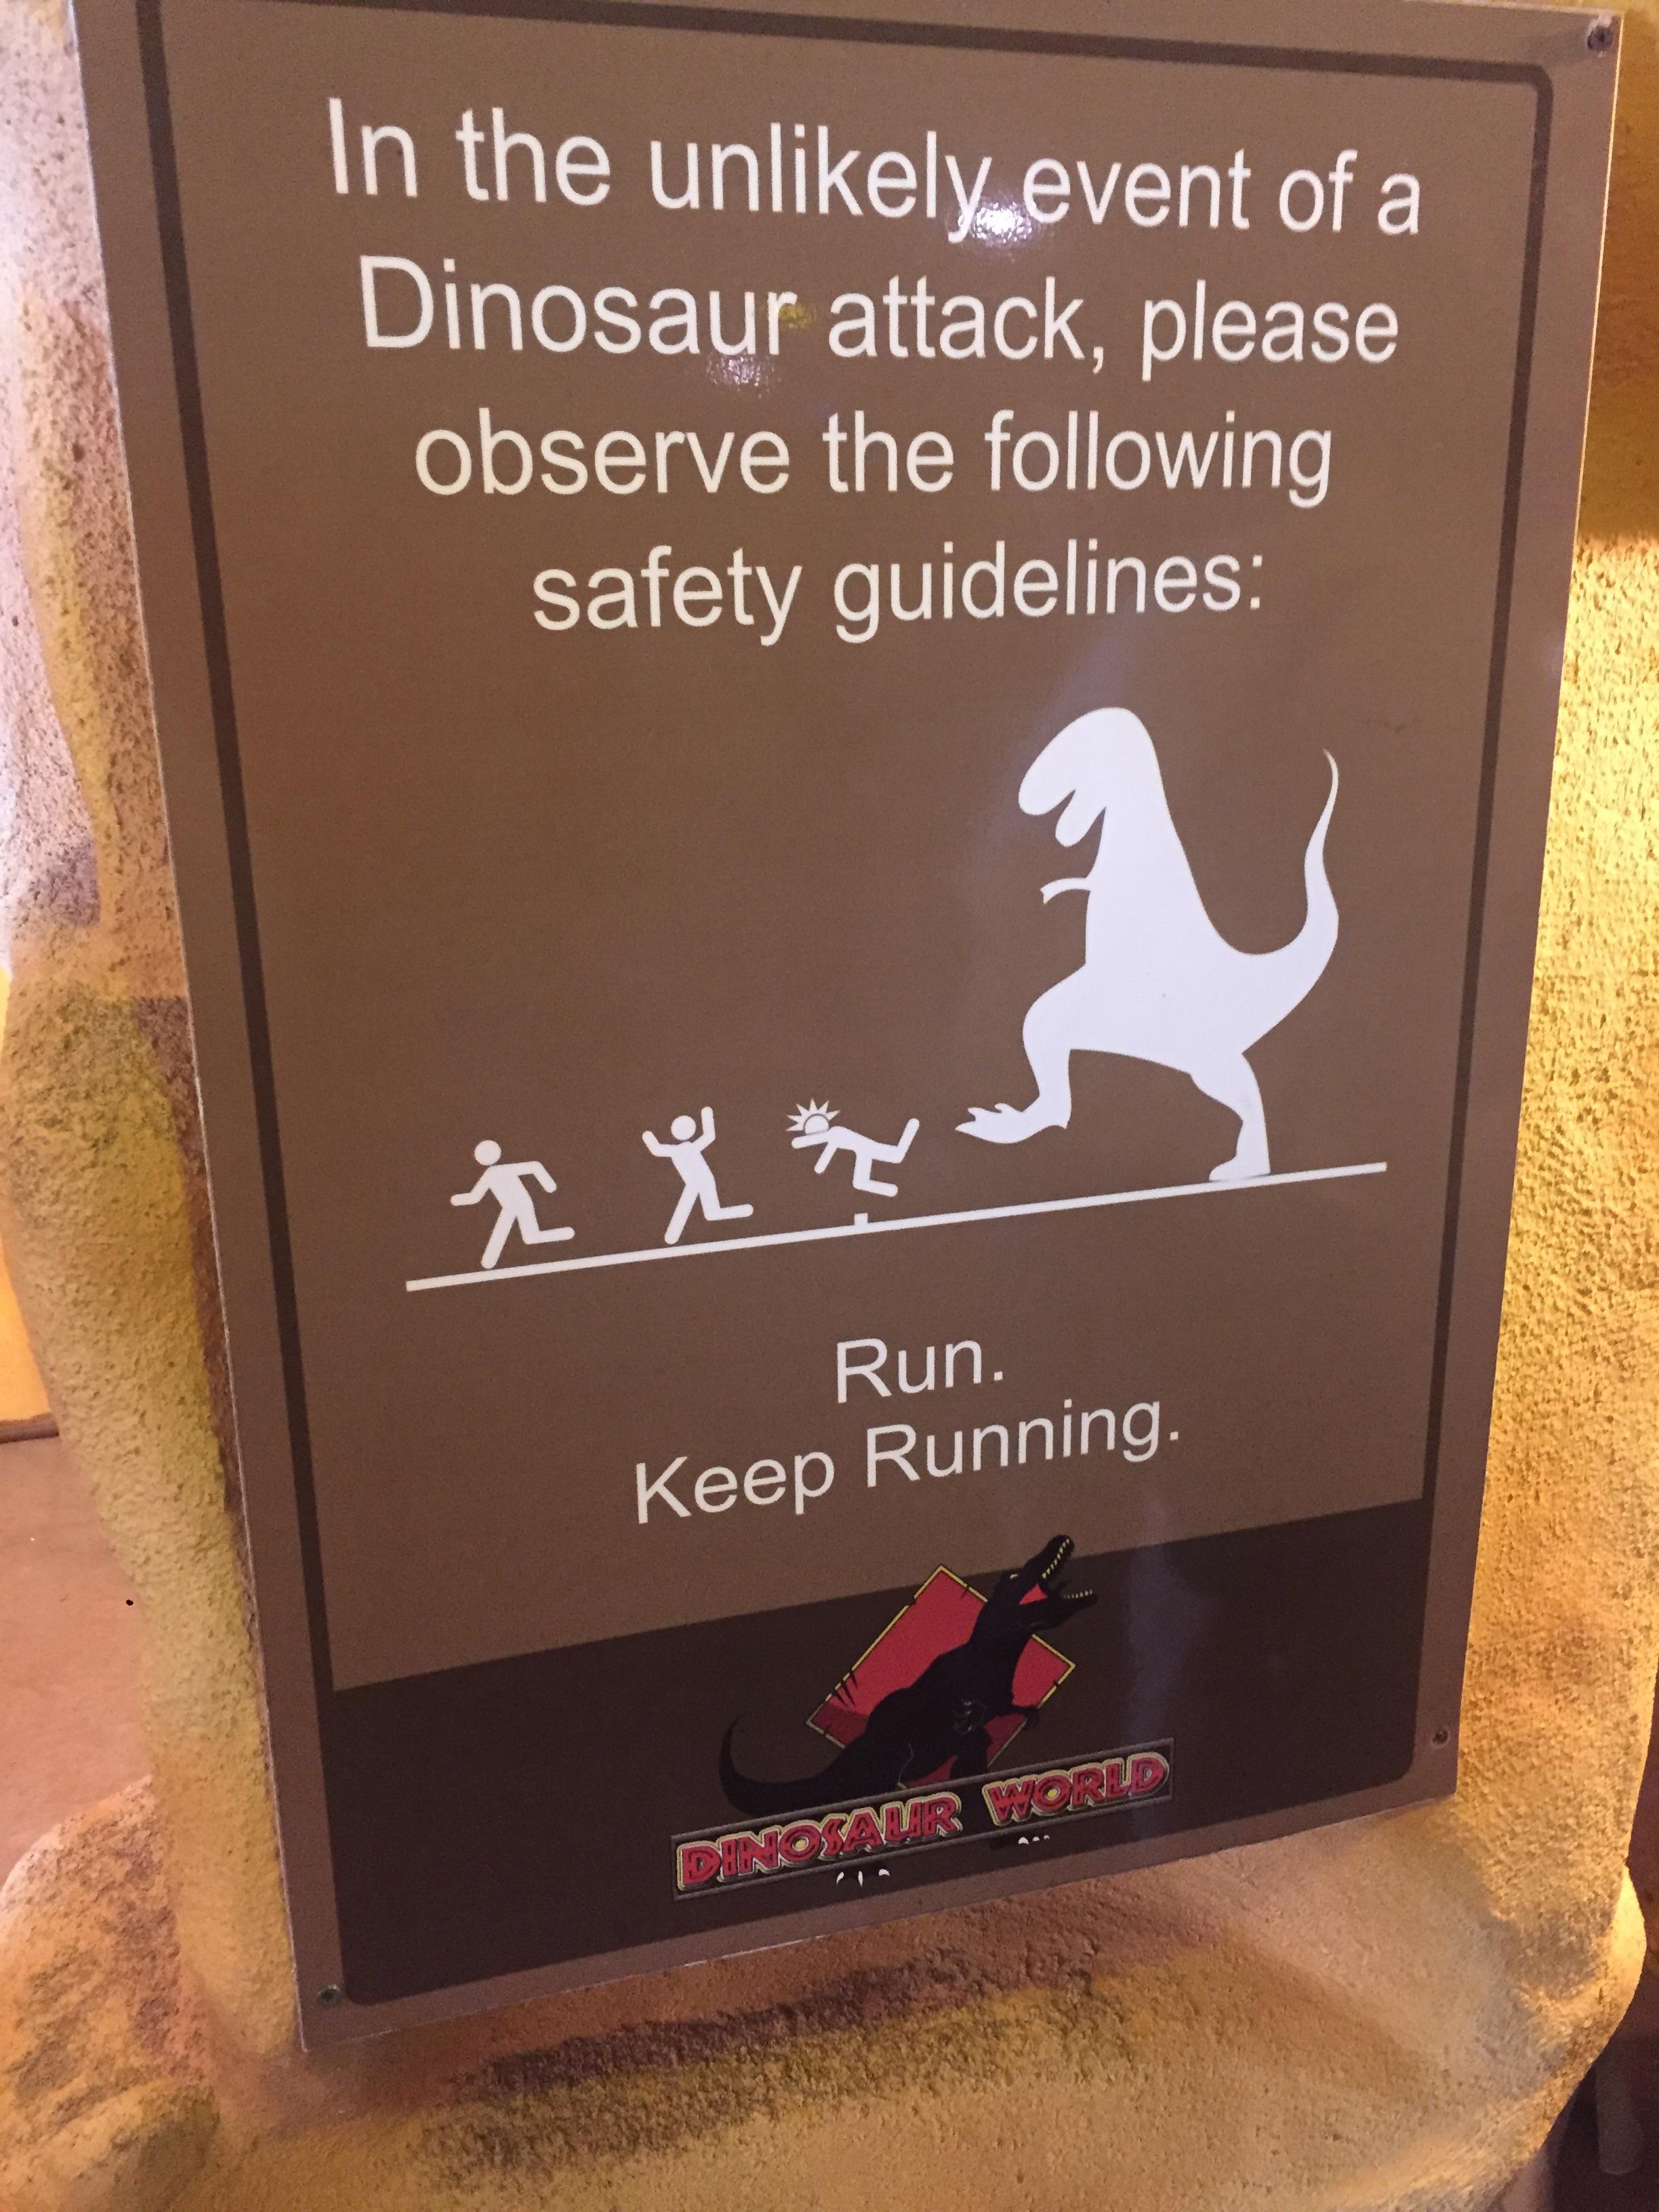 In the unlikely event of a Dinosaur attack, please observe the following safety guidelines: Run. Keep Running.